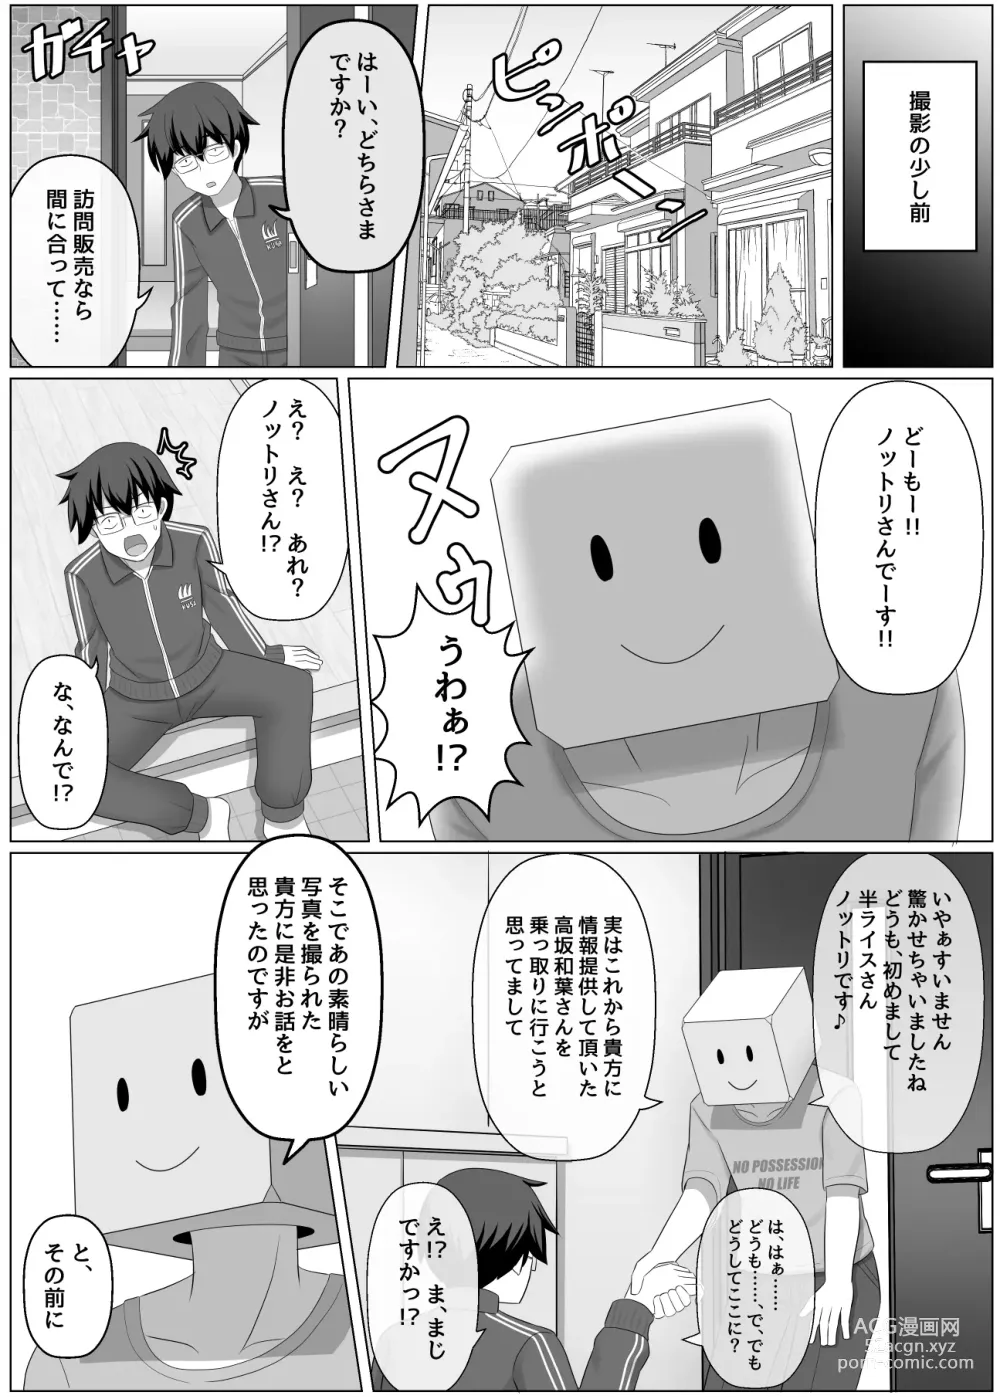 Page 3 of doujinshi Nottori Channel